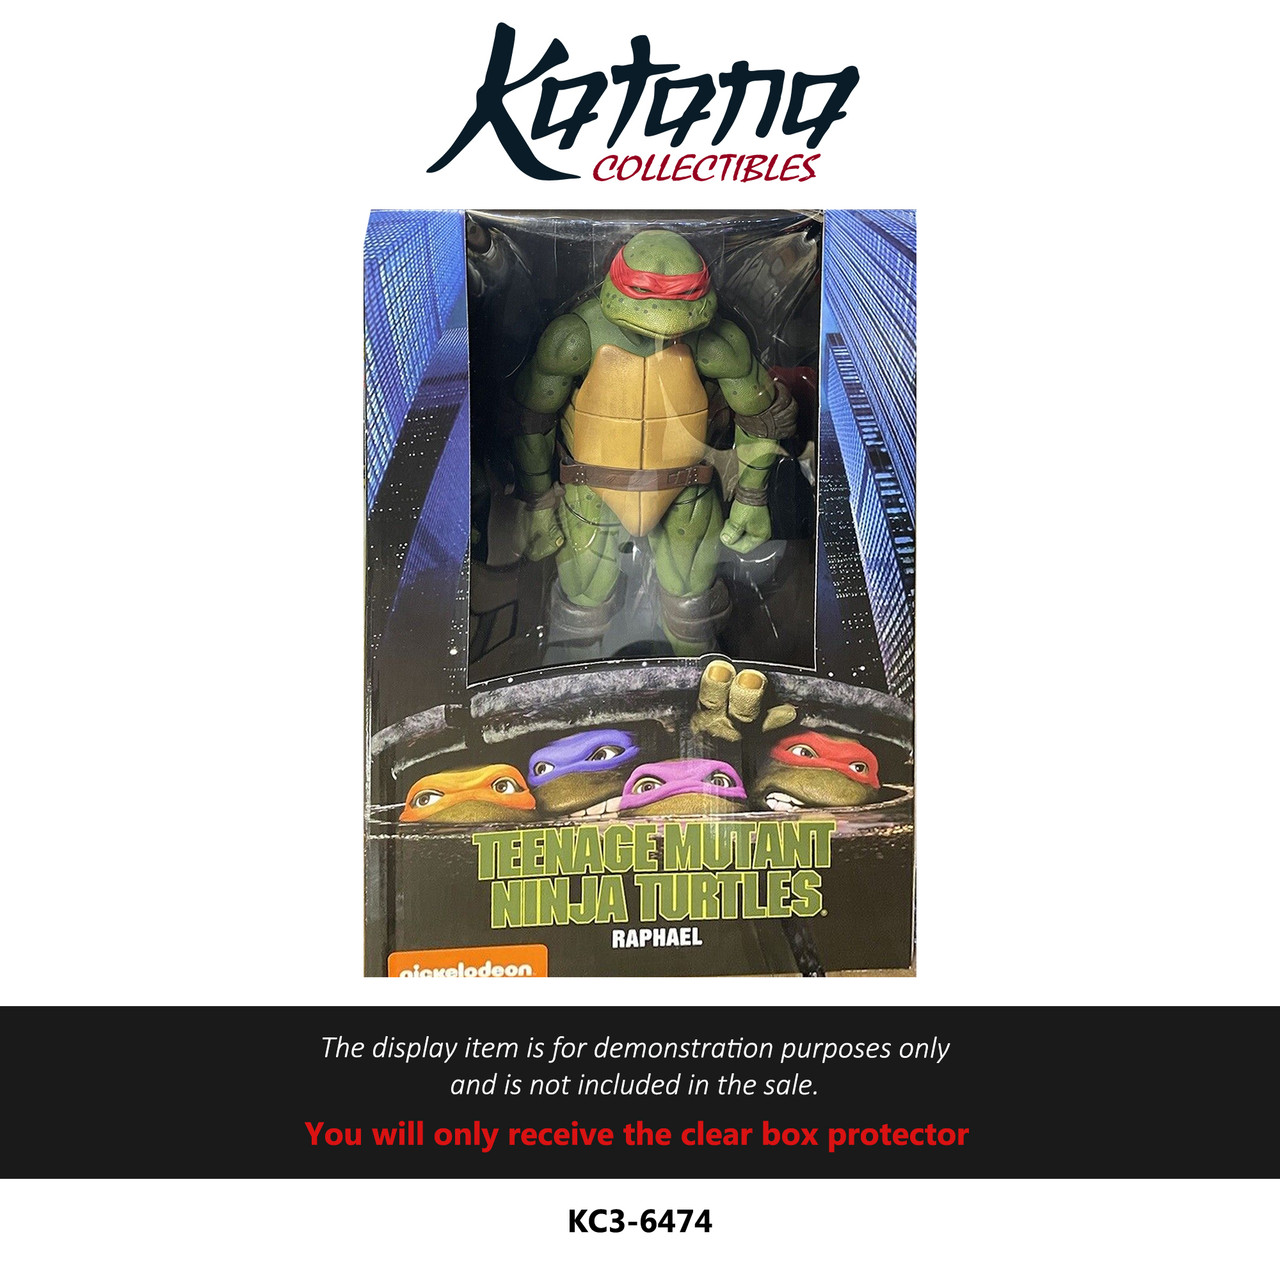 Katana Collectibles Protector For NECA TMNT 1:4 Scale 1990 Movie Series - Raphael